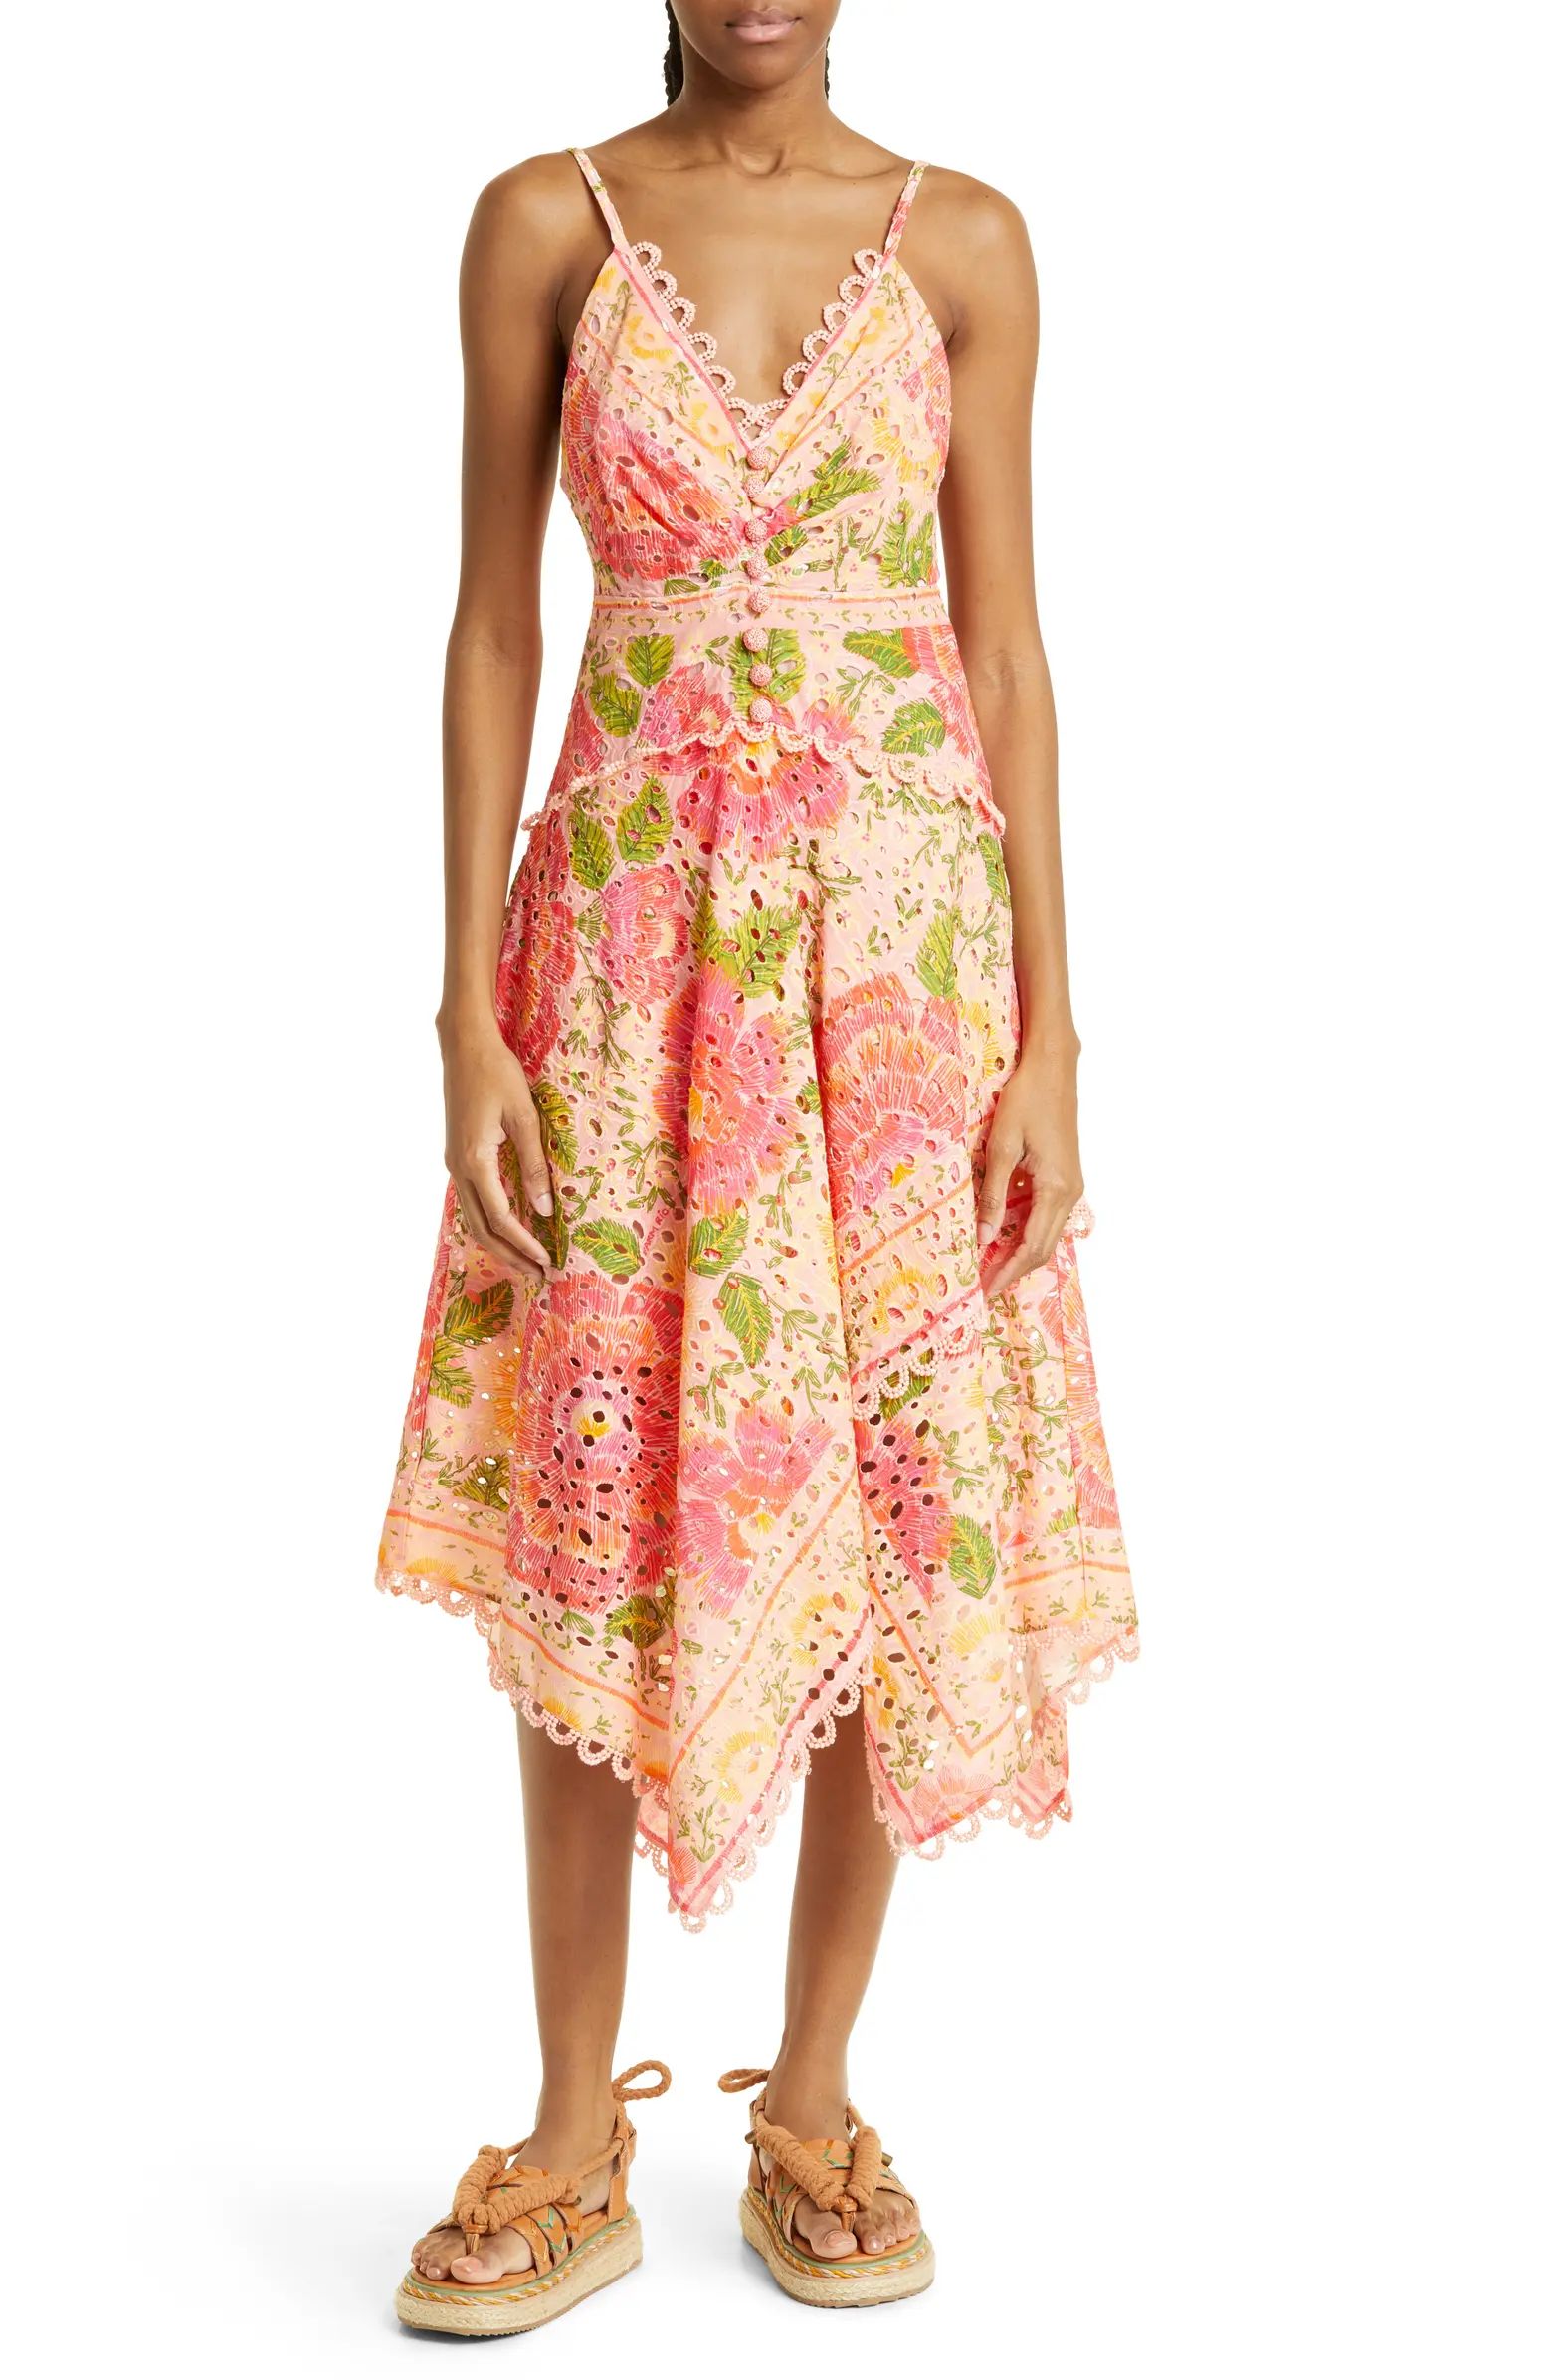 Blooming Floral Cotton Dress | Nordstrom